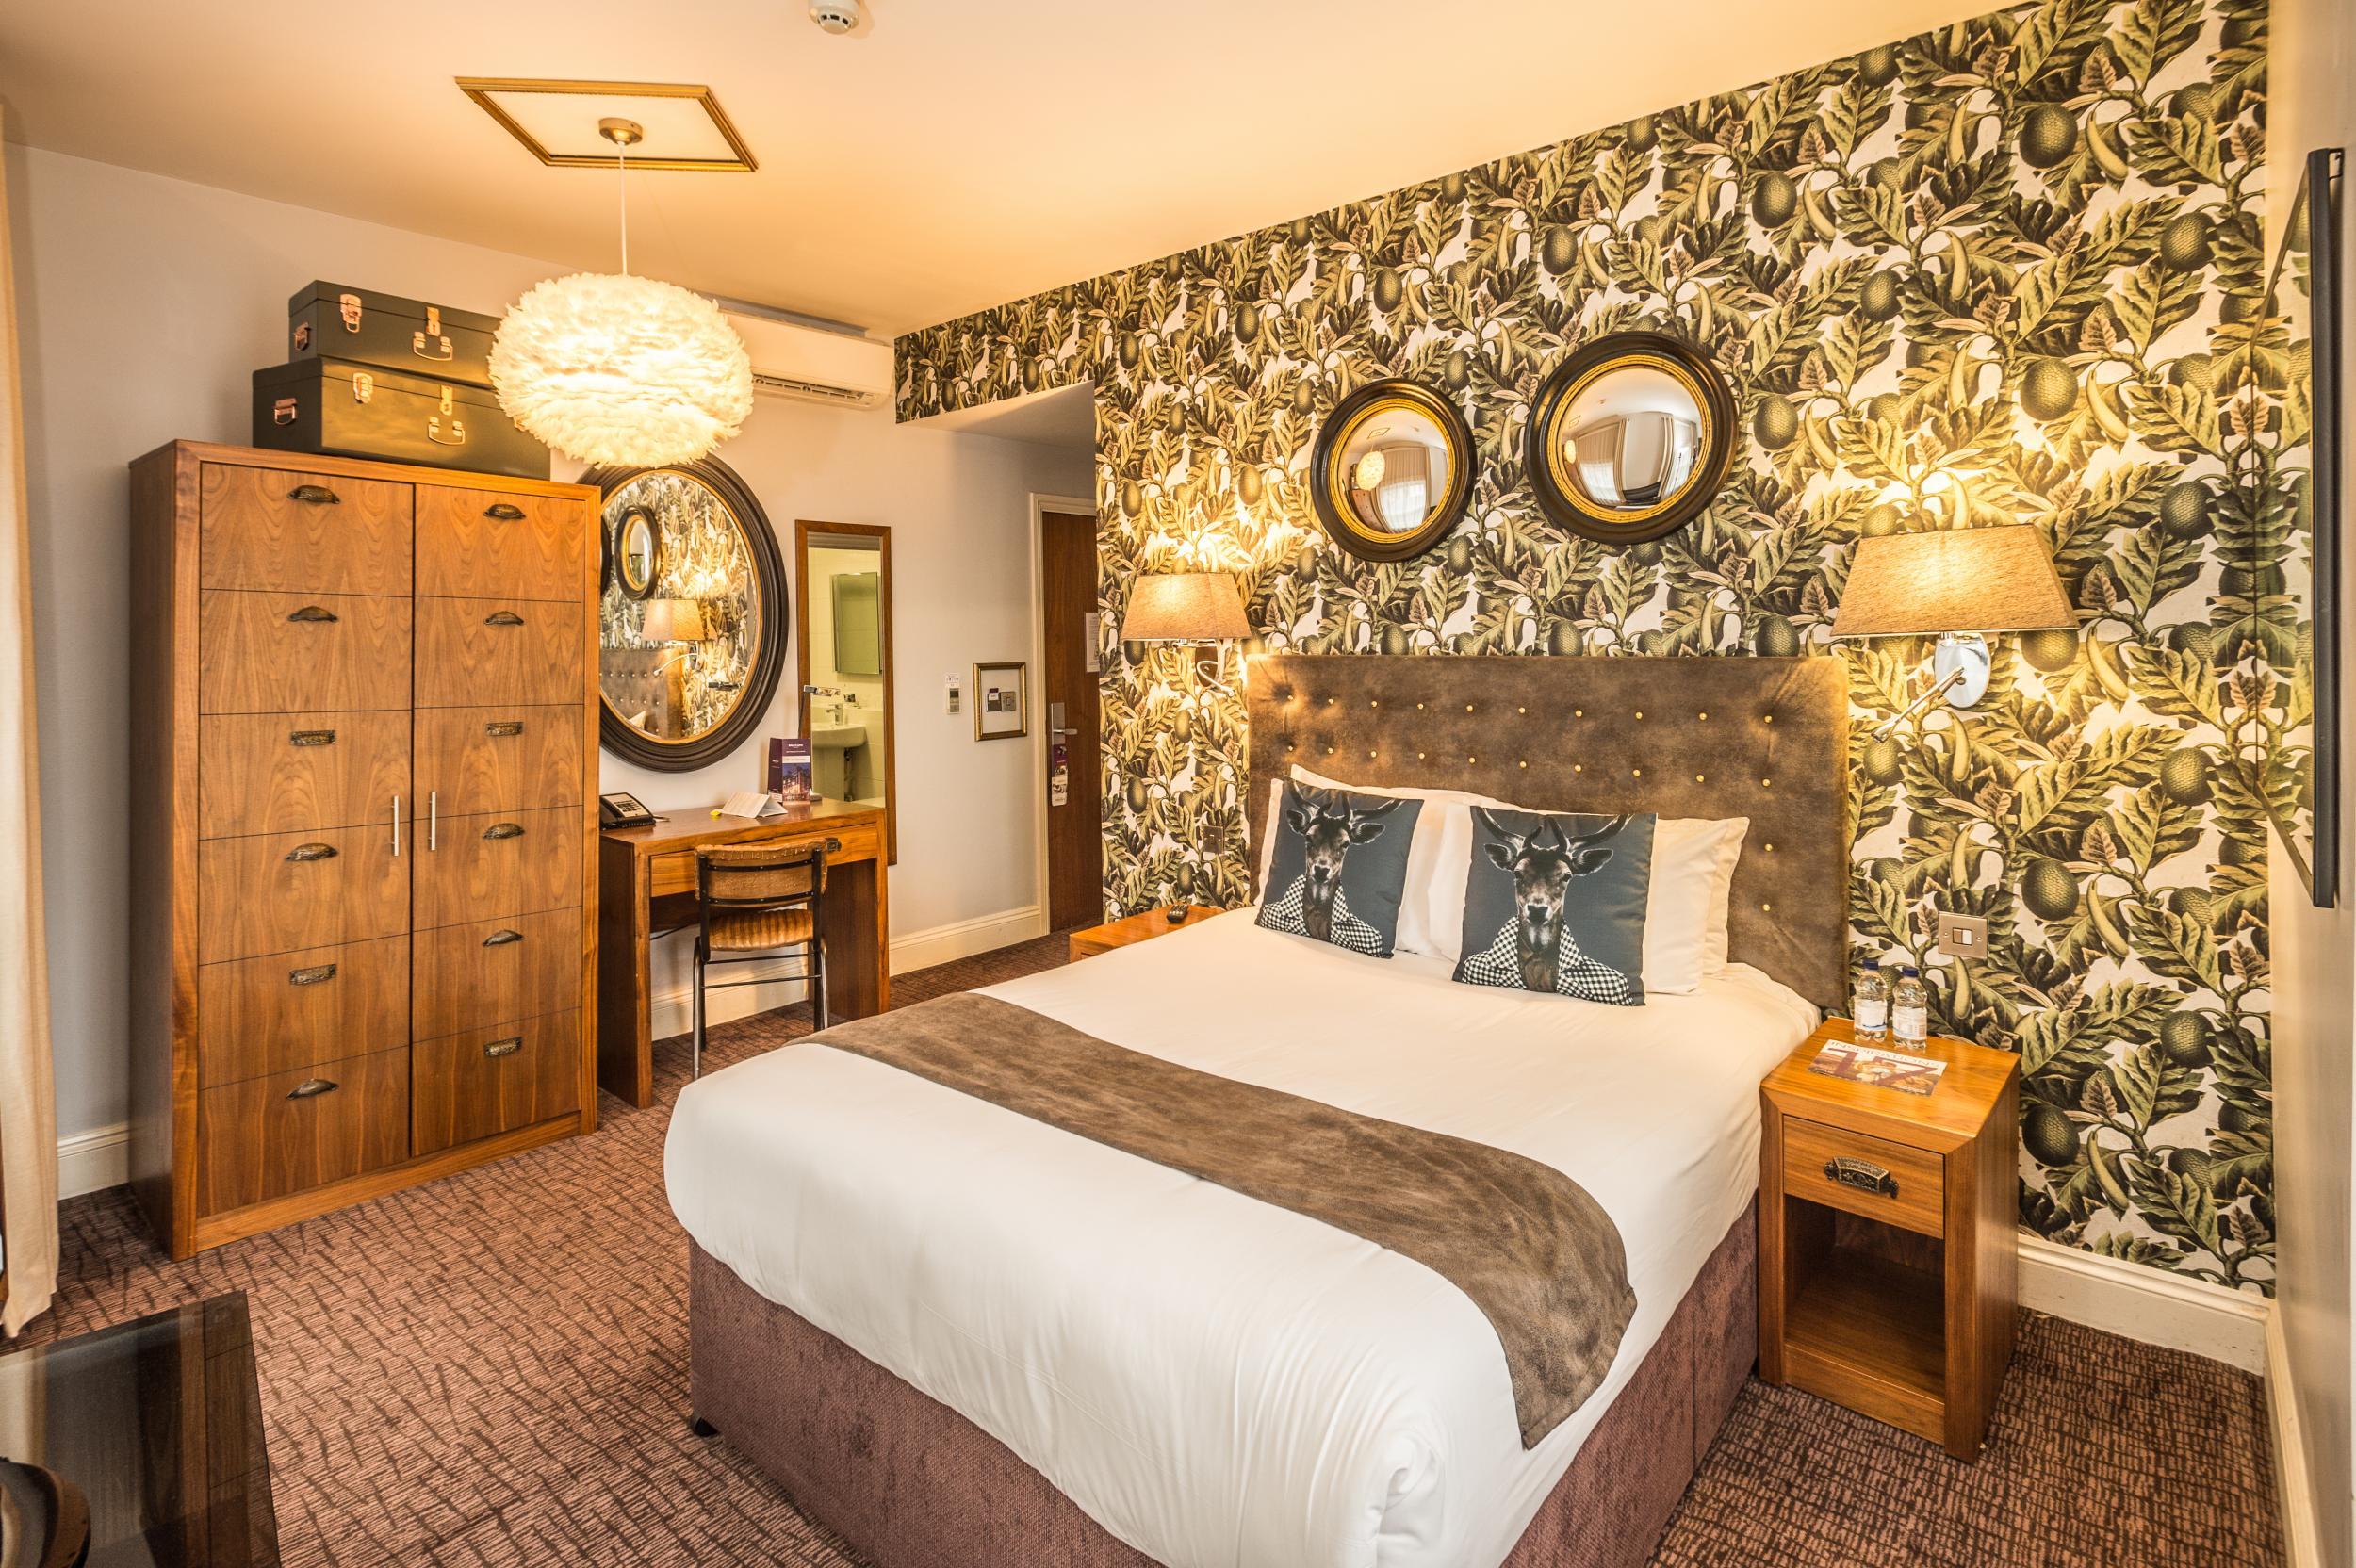 Plenty of quirky charm to be found at the Mercure Nottingham City